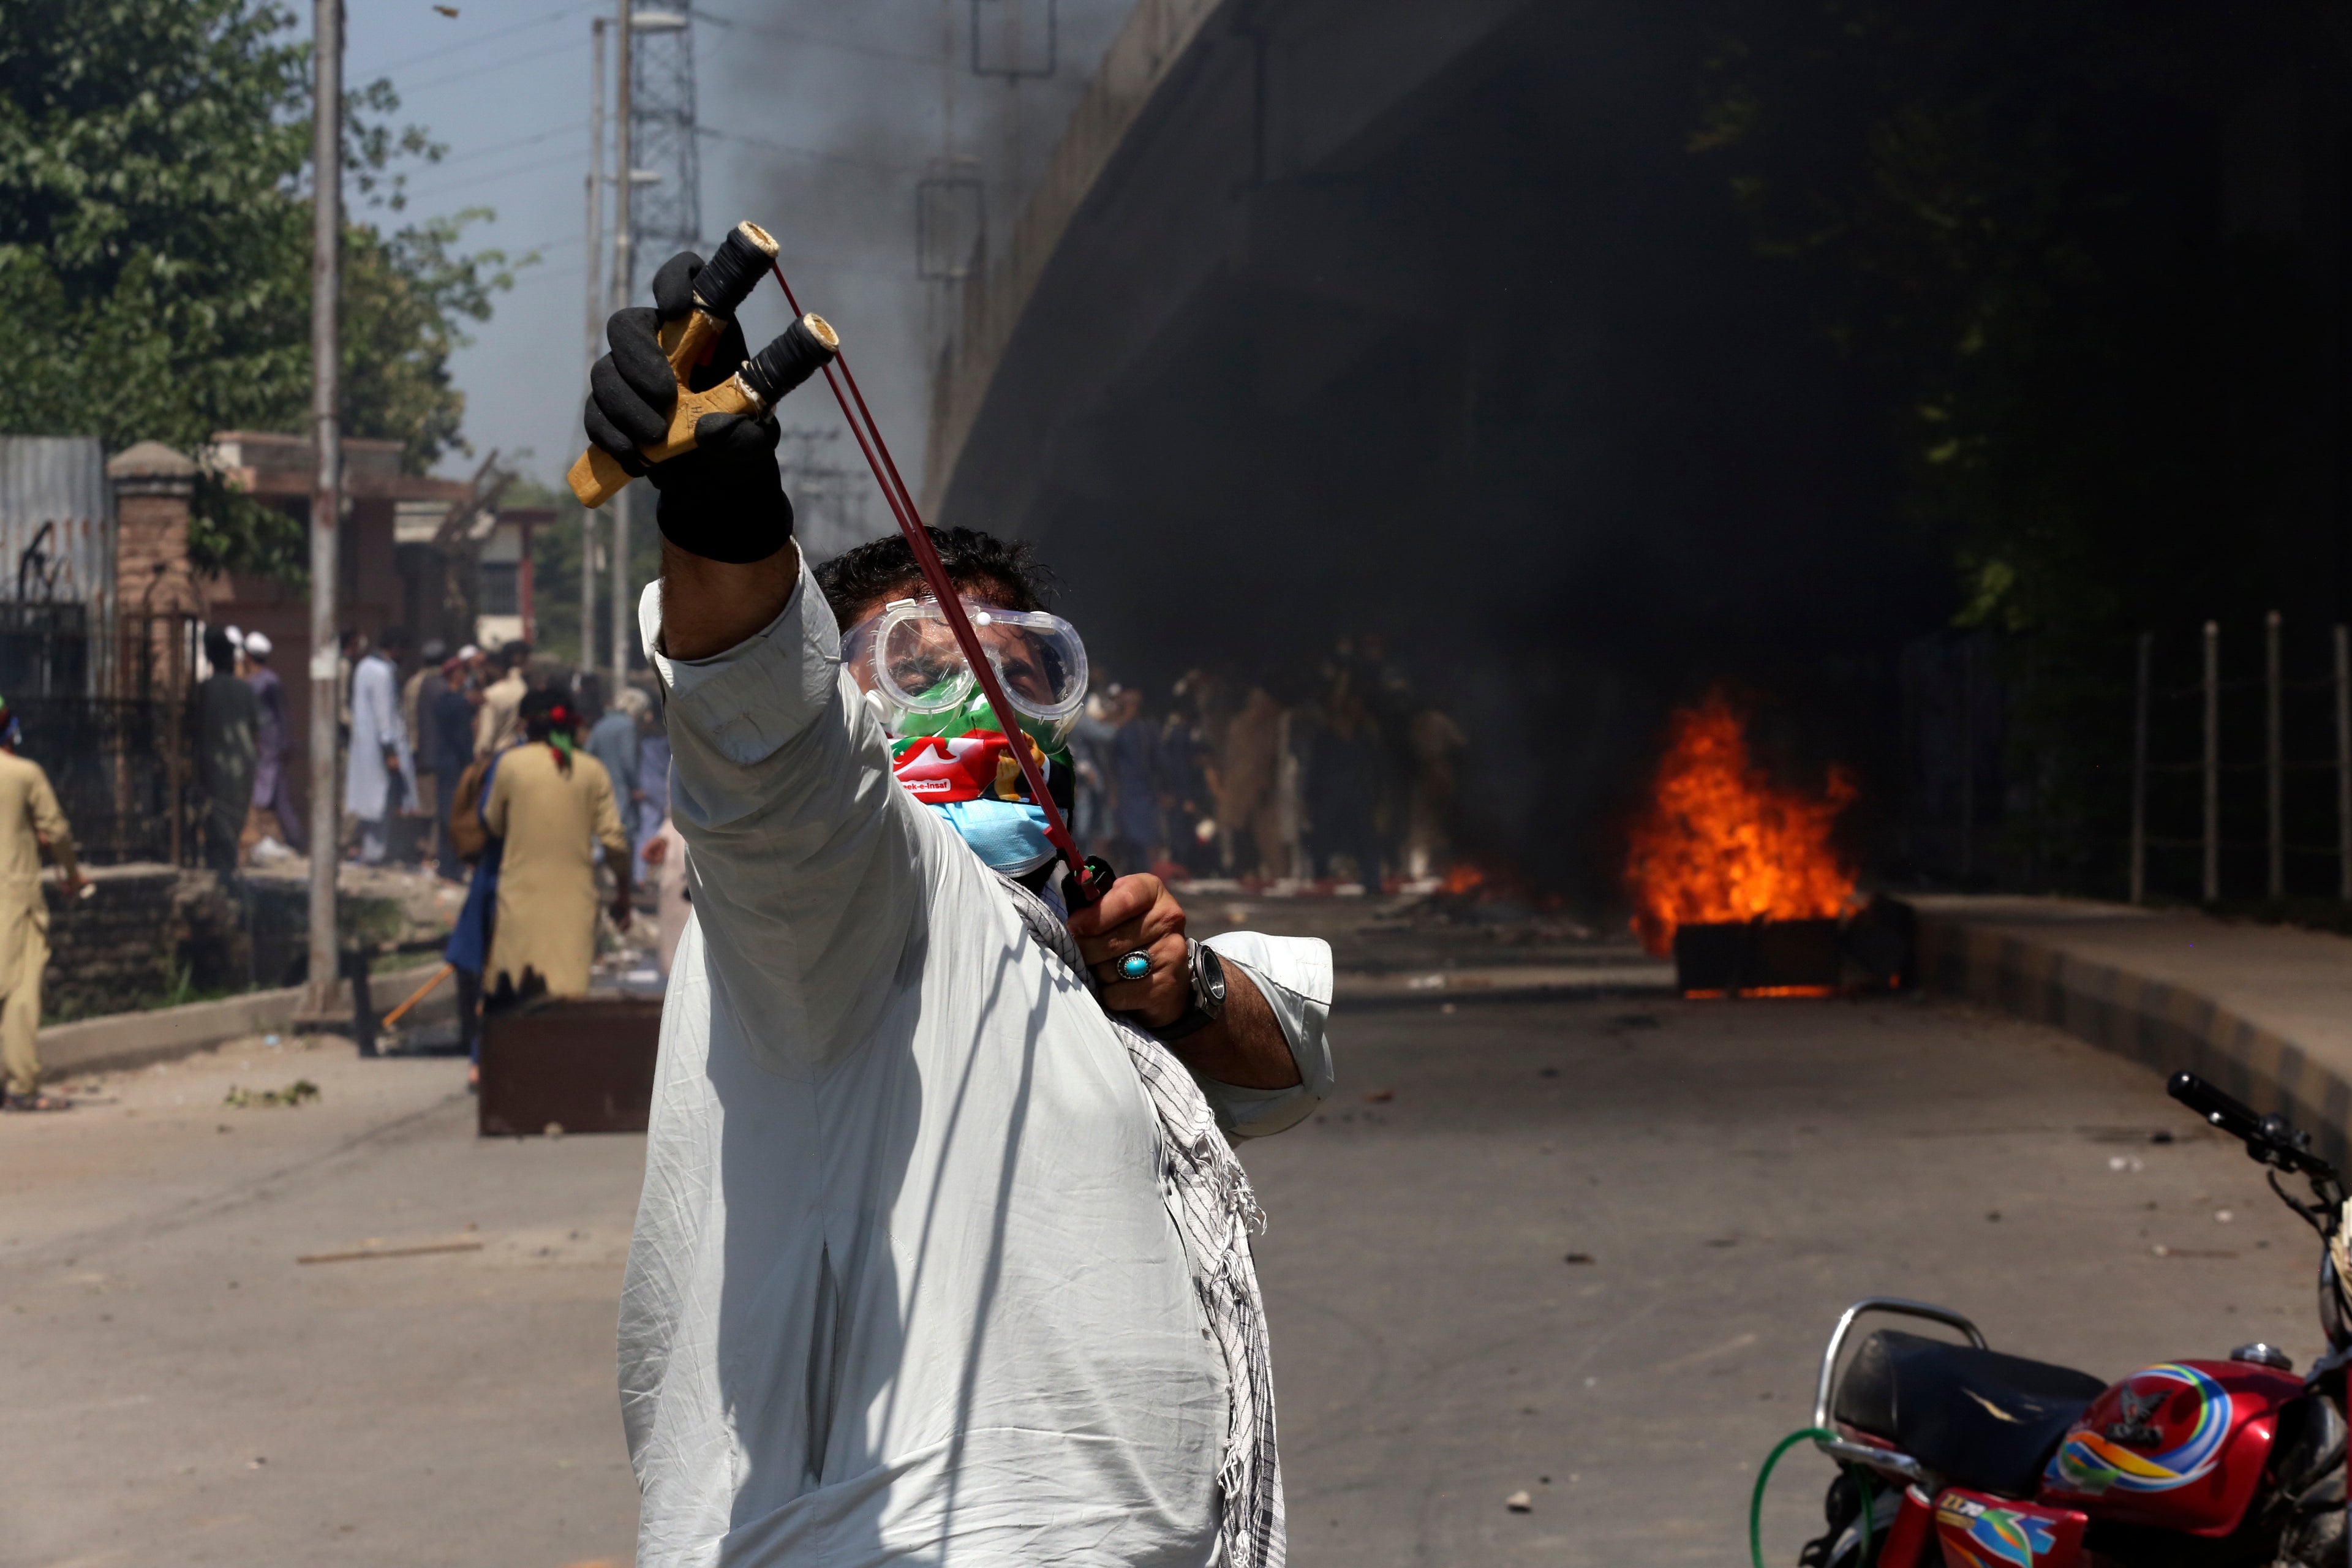 A protester aims a slingshot towards police (unseen)